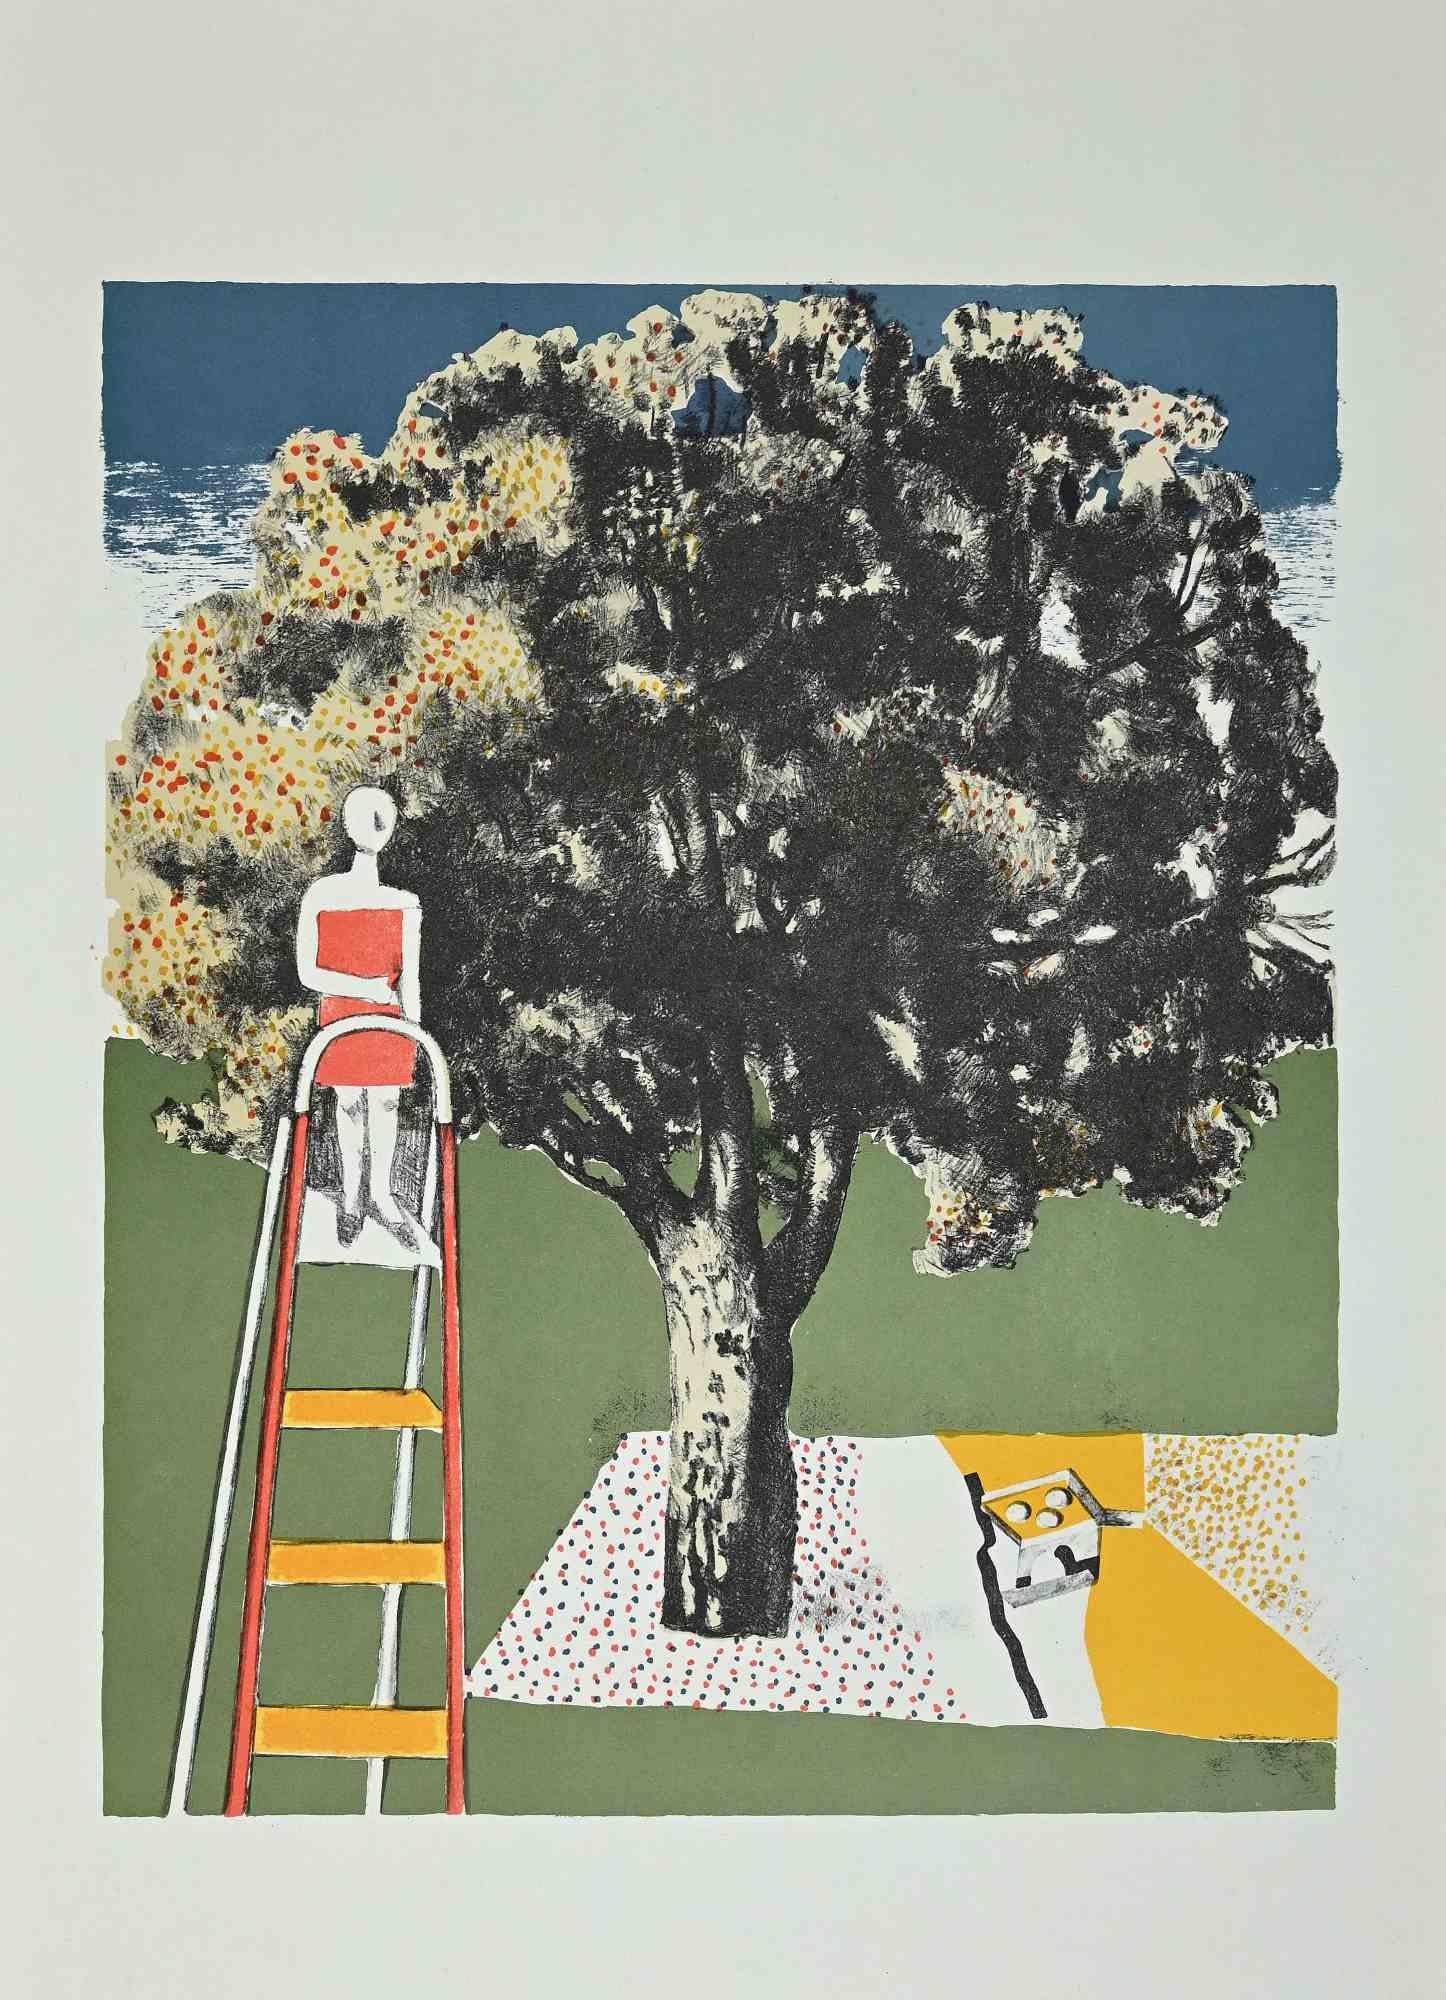 Figure and Tree is a Vintage Offset Print on ivory-colored paper, realized by  Franco Gentilini ( Italian Painter, 1909-1981), in the 1970s.

The state of preservation of the artwork is excellent.

Franco Gentilini ( Italian Painter, 1909-1981):